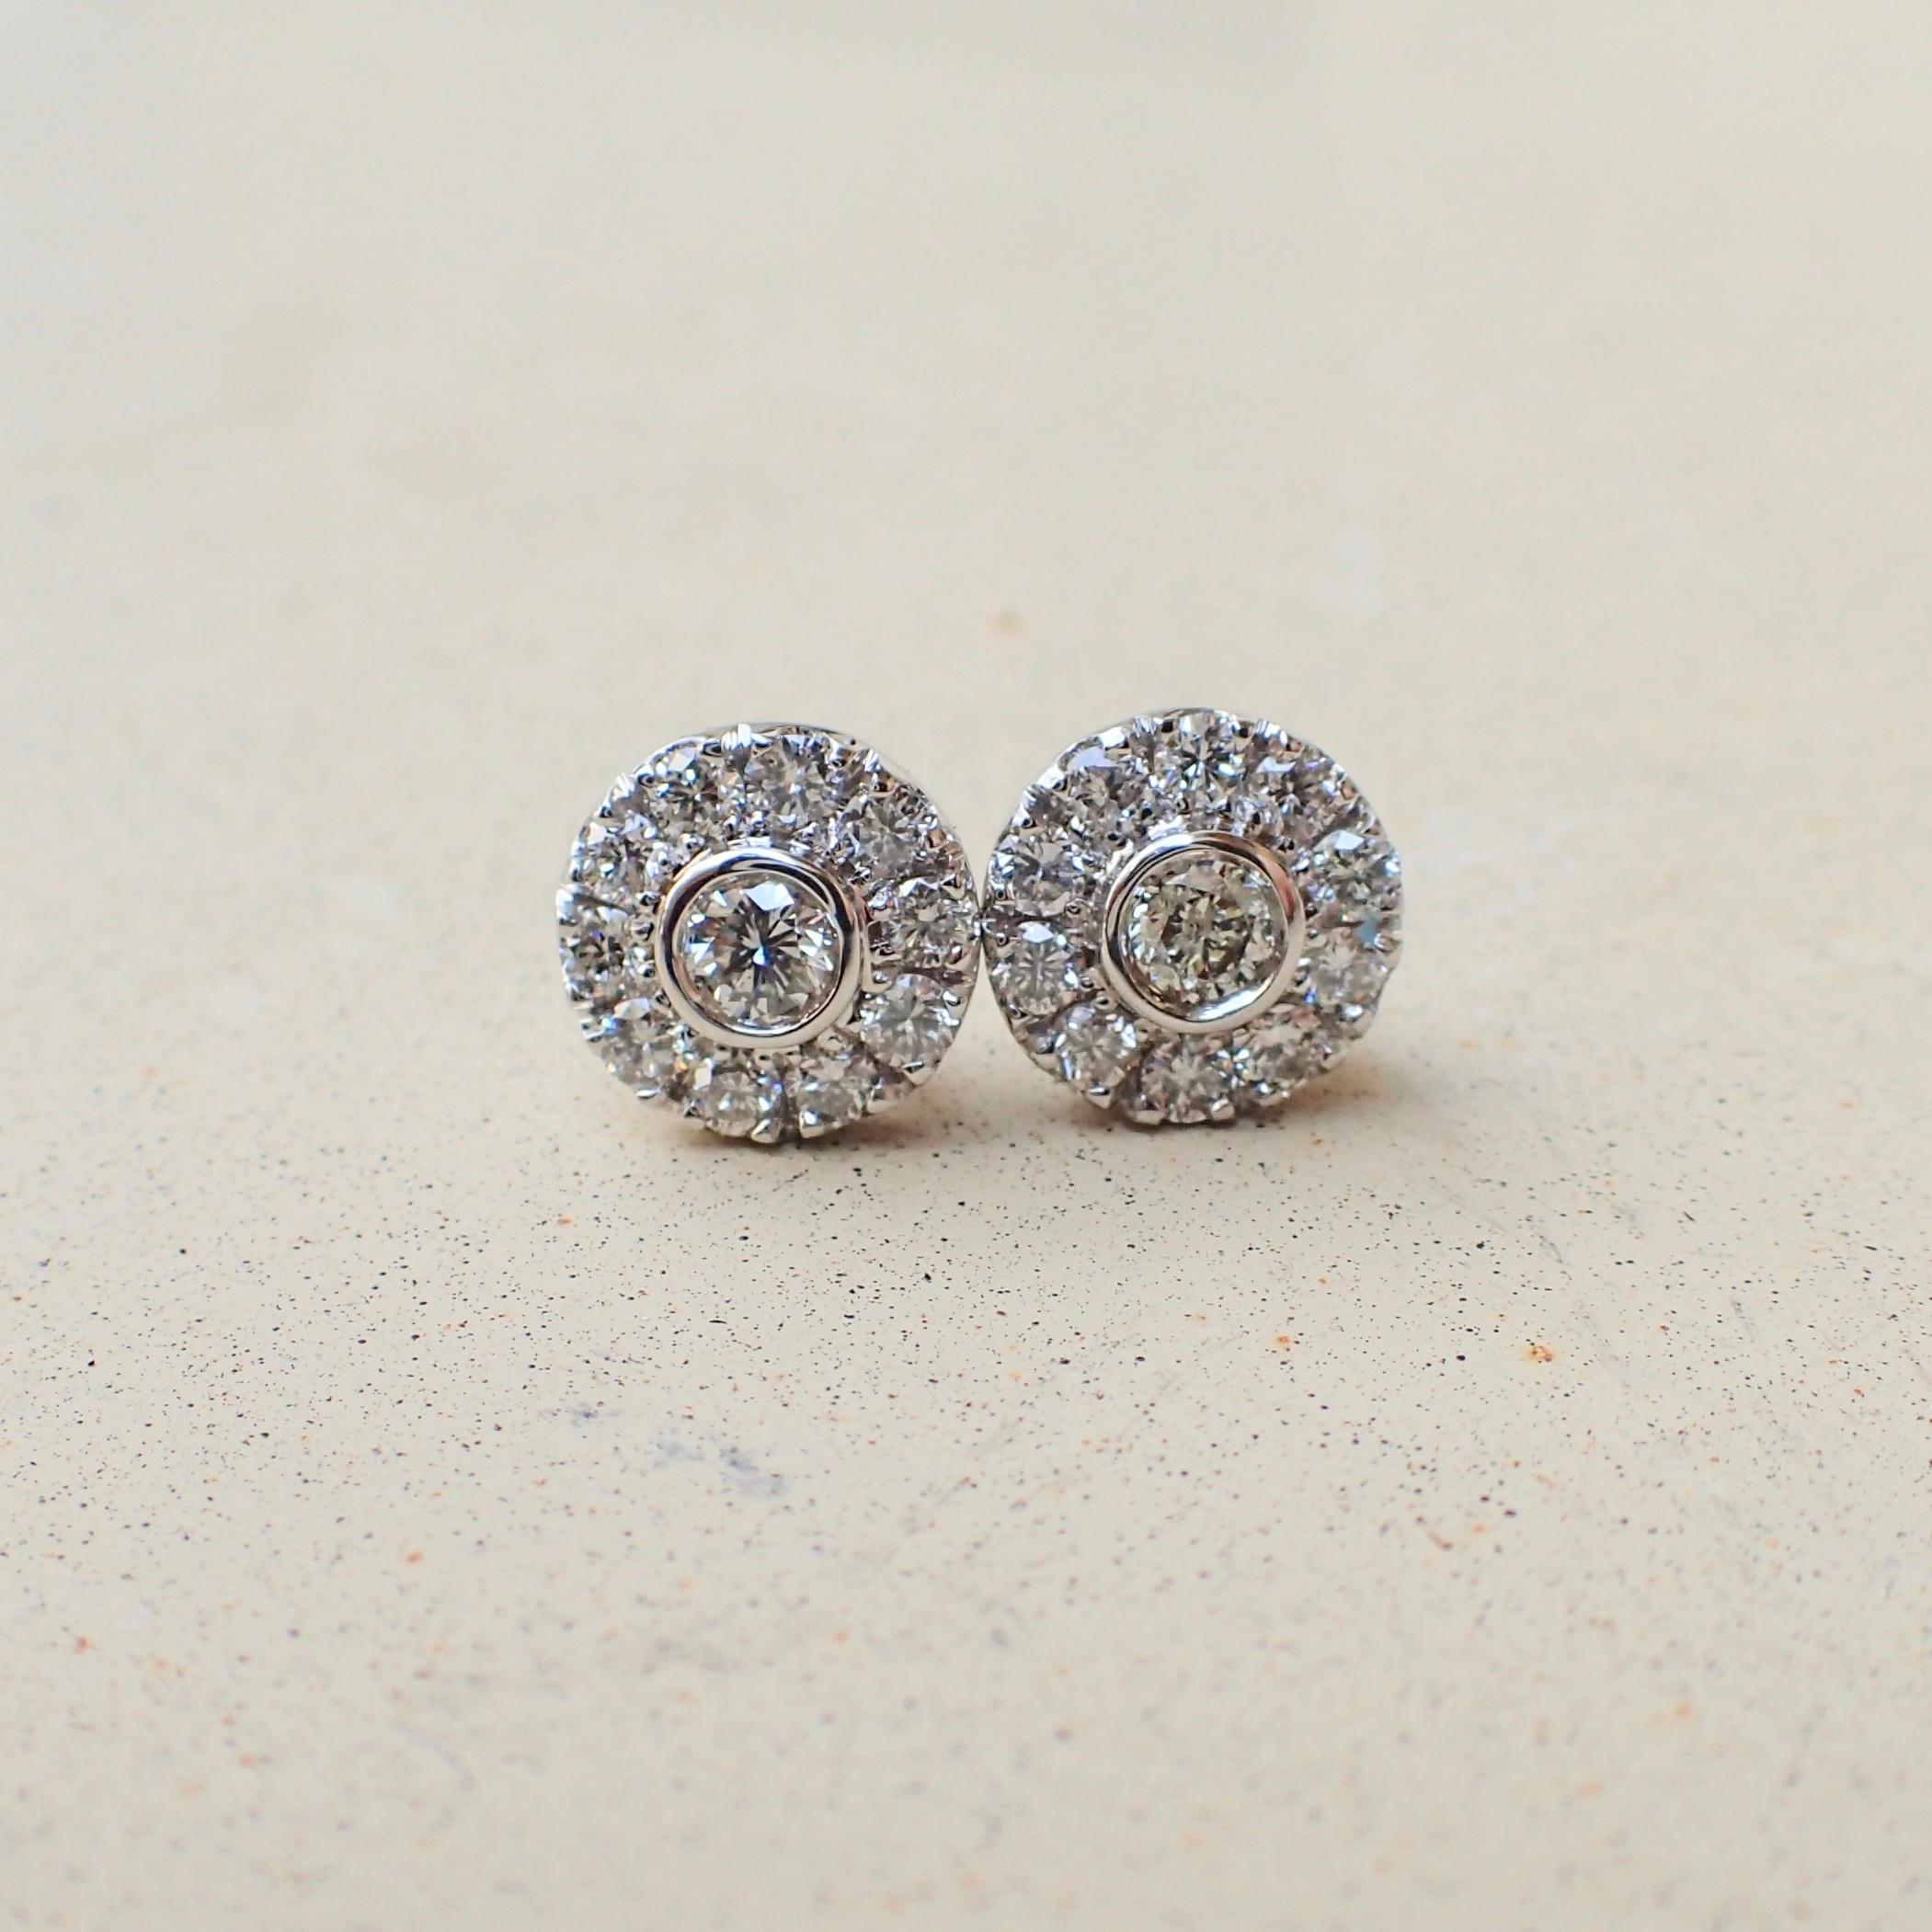 Round Cut 18 Karat White Gold Stud Earrings are Set with 0.42 Carat of Diamond For Sale